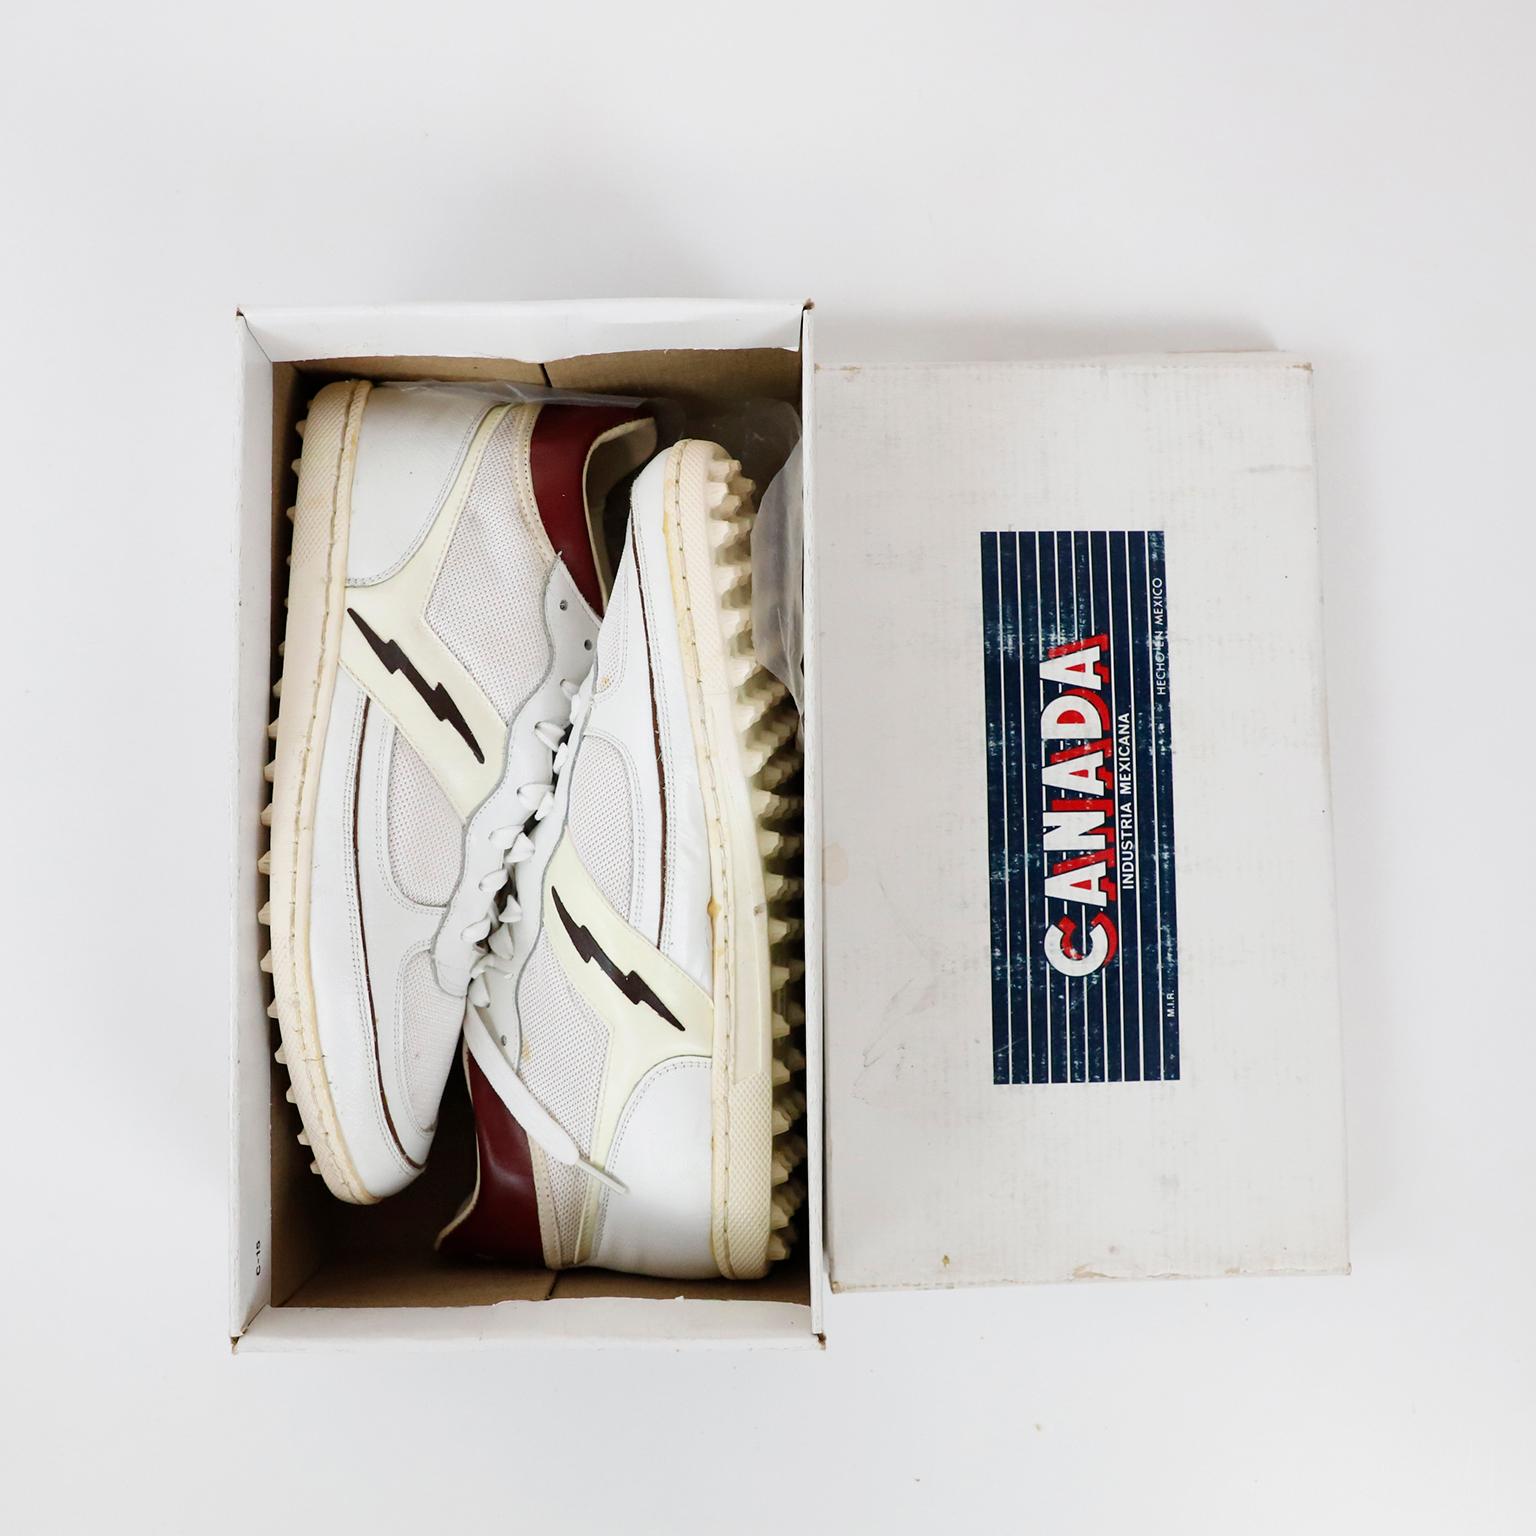 circa 1970. We offer this unique pair of never used CANADA sneakers with original box.
About CANADA:
CANADA was a very successful Mexican shoes and sneakers brand, during the 70s and 80s.
In the book Shoe Dog, in which Phil Knight, the legendary